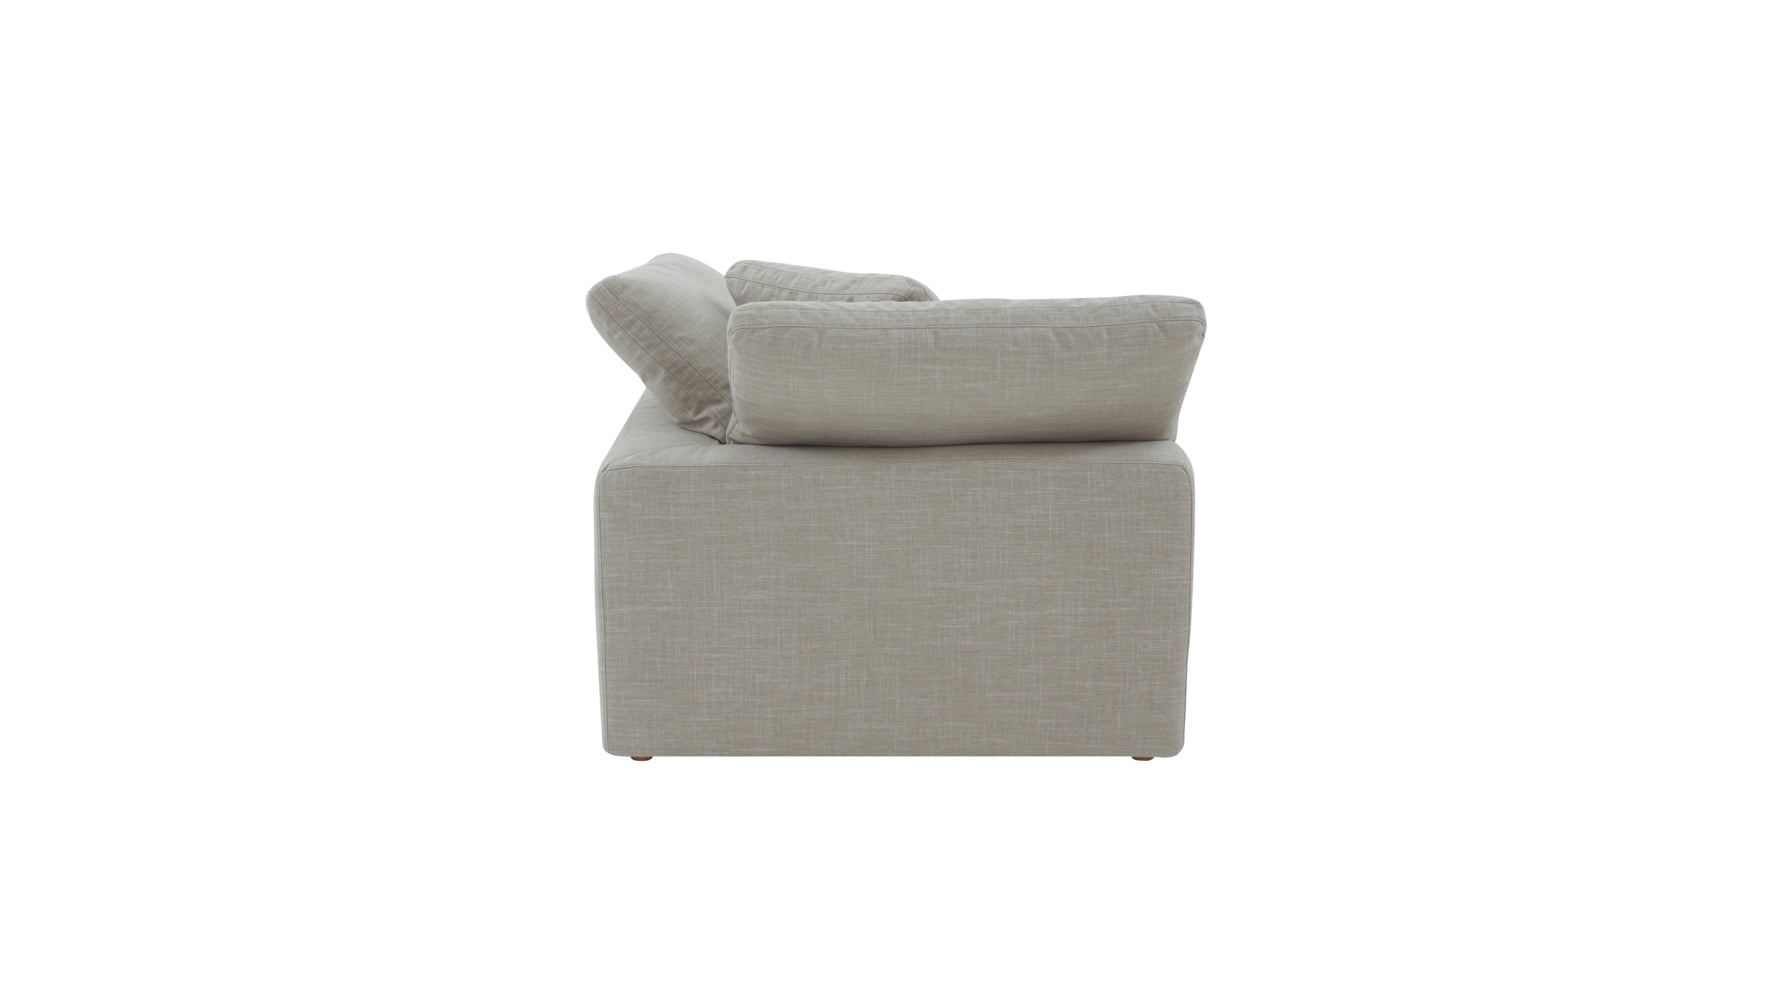 Movie Night™ Corner Chair, Large, Light Pebble (Left or Right) - Image 6